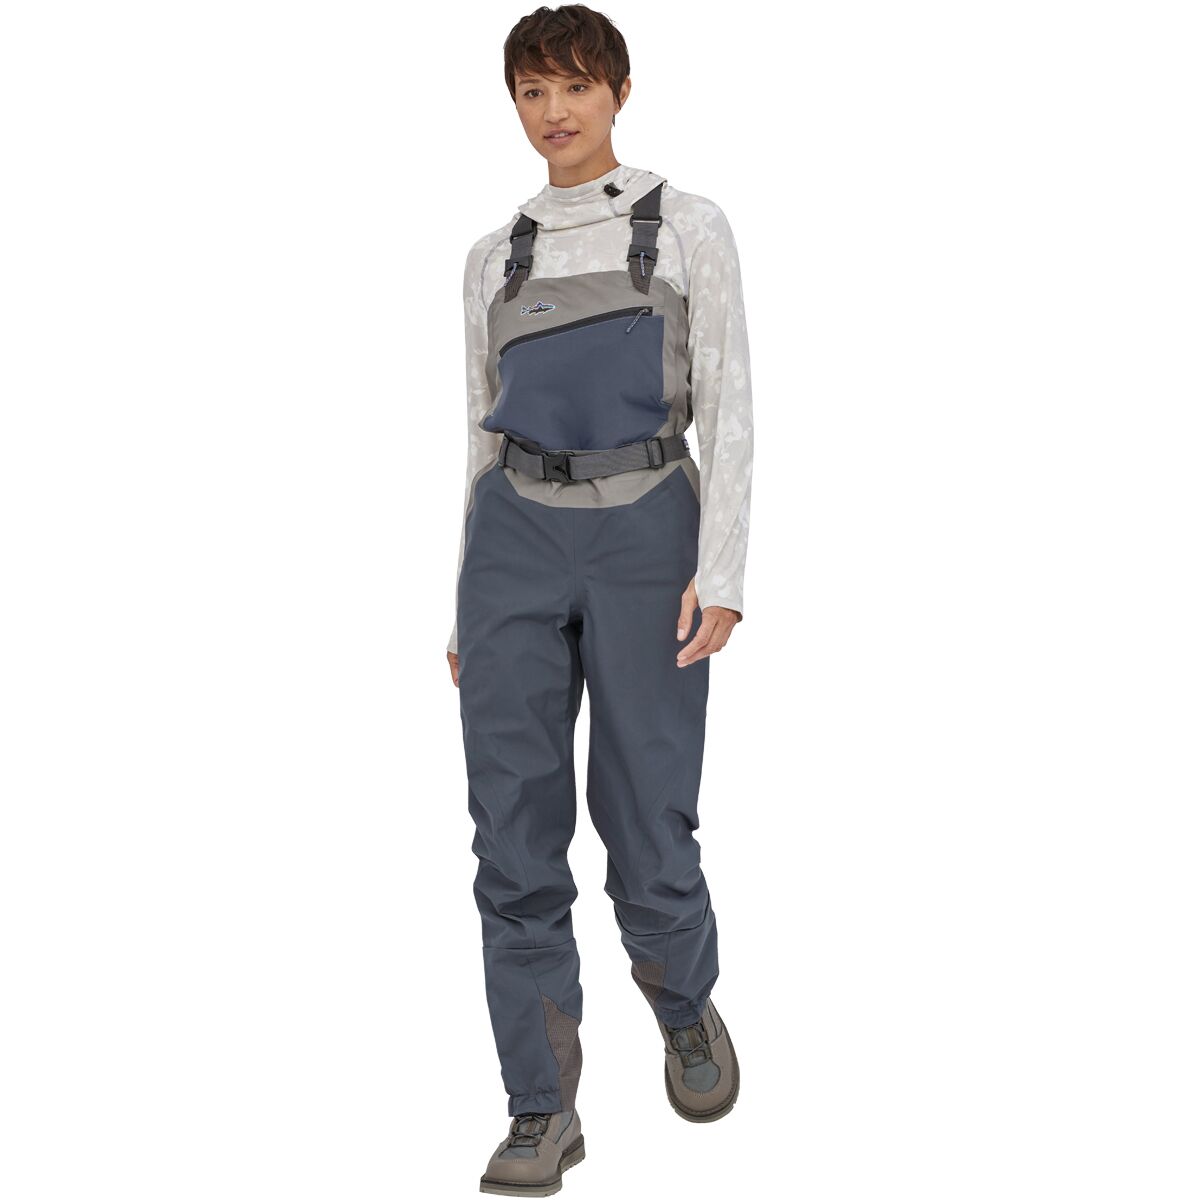 Patagonia Swiftcurrent Waders - Women's